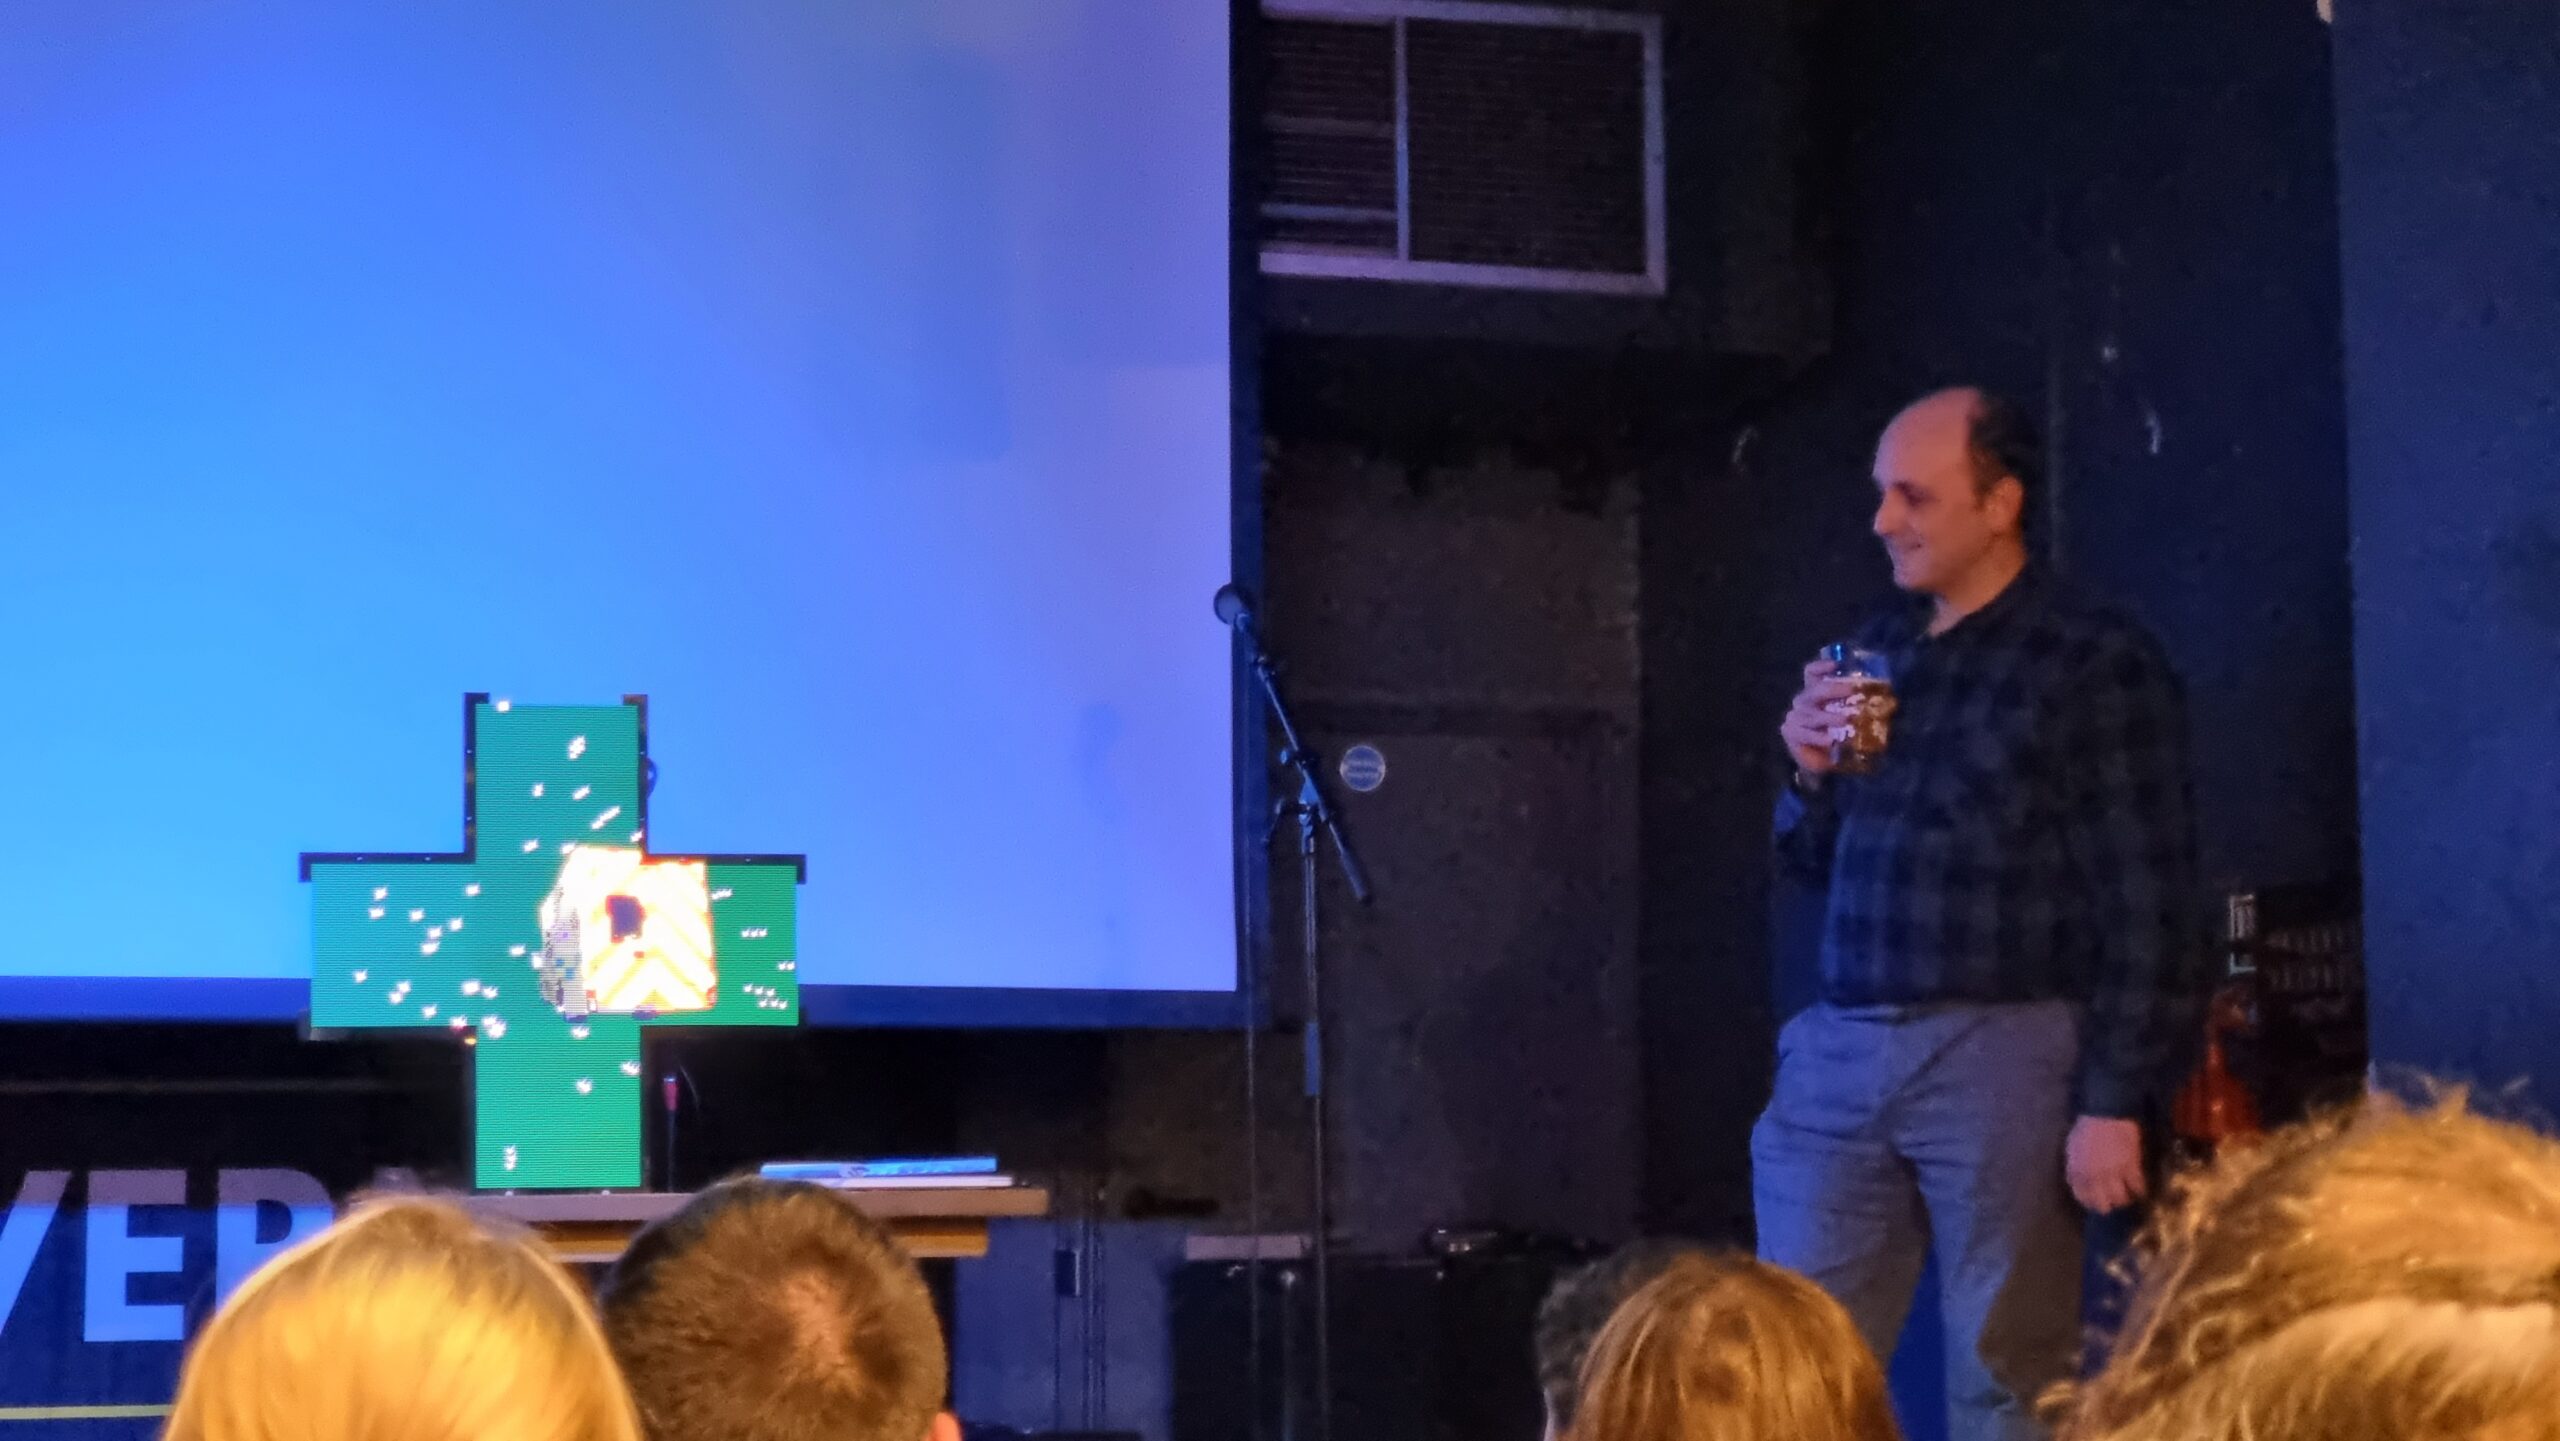 Matt Westcott stands to the side of a stage, drinking beer, while centrestage a cross-shaped "pharmacy sign" projects an animation of an ambulance rocketing into a starfield.